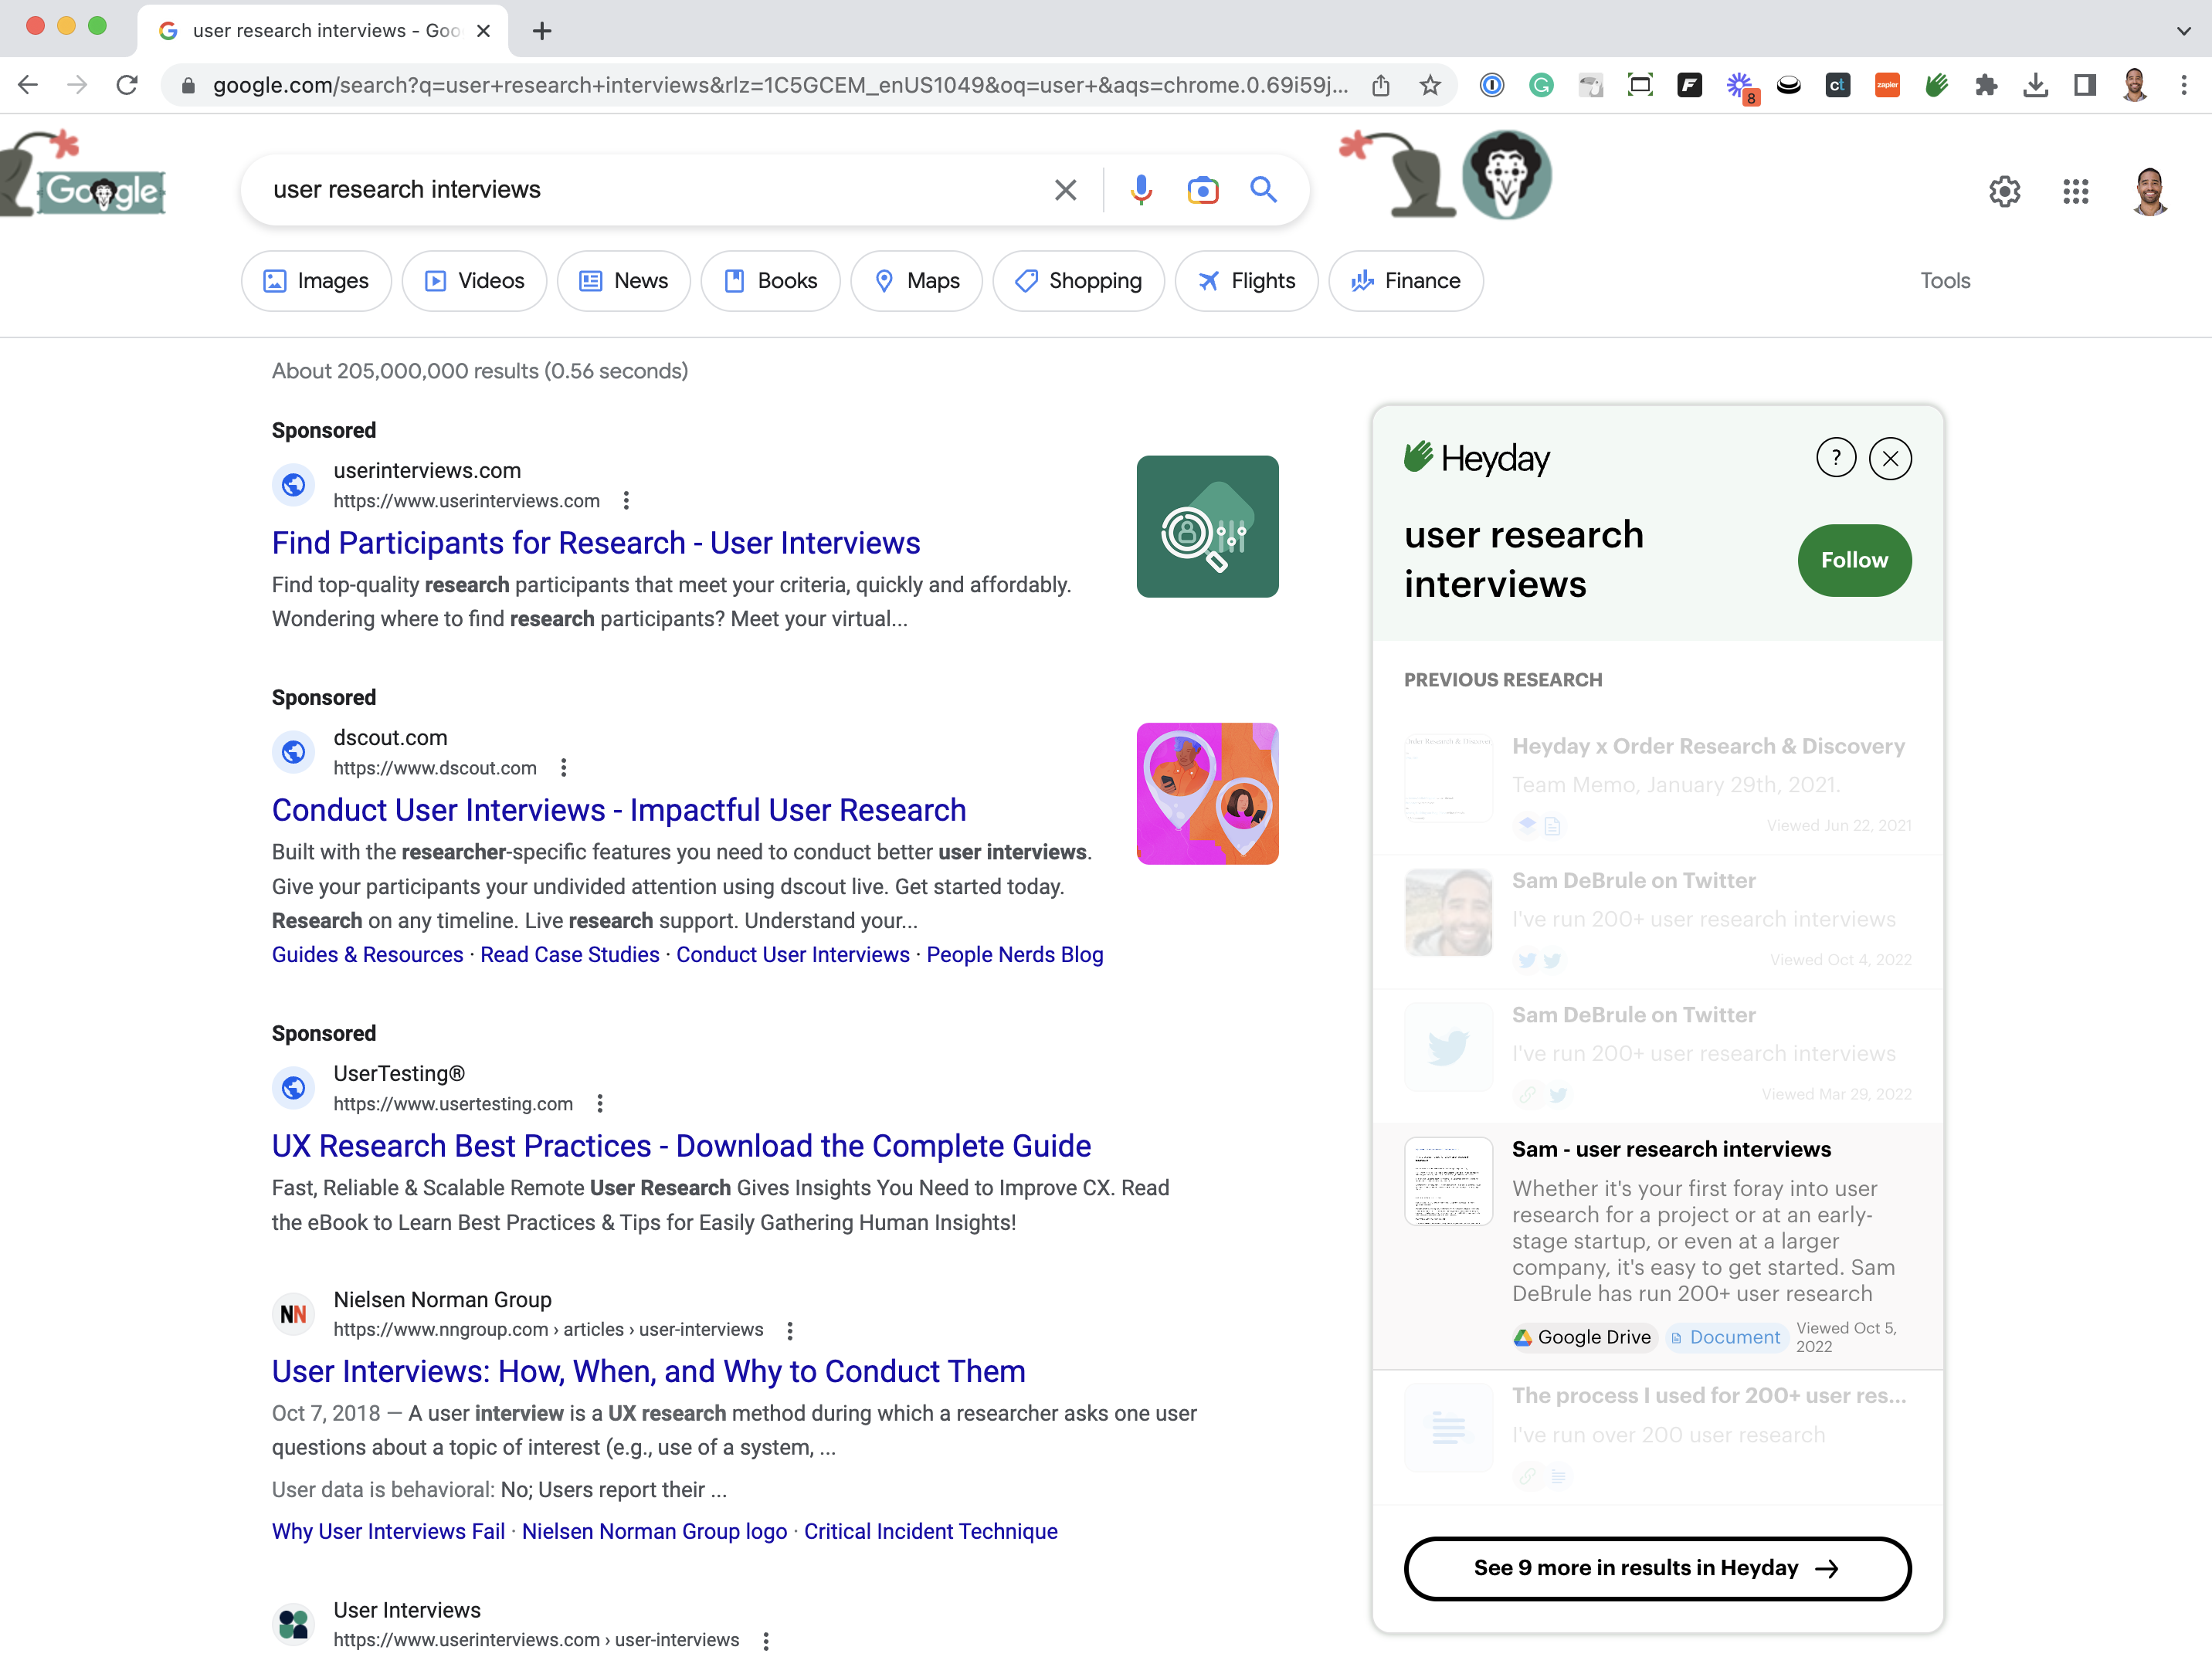 Heyday AI assistant, Chrome Browser, Heyday search result from Google Docs